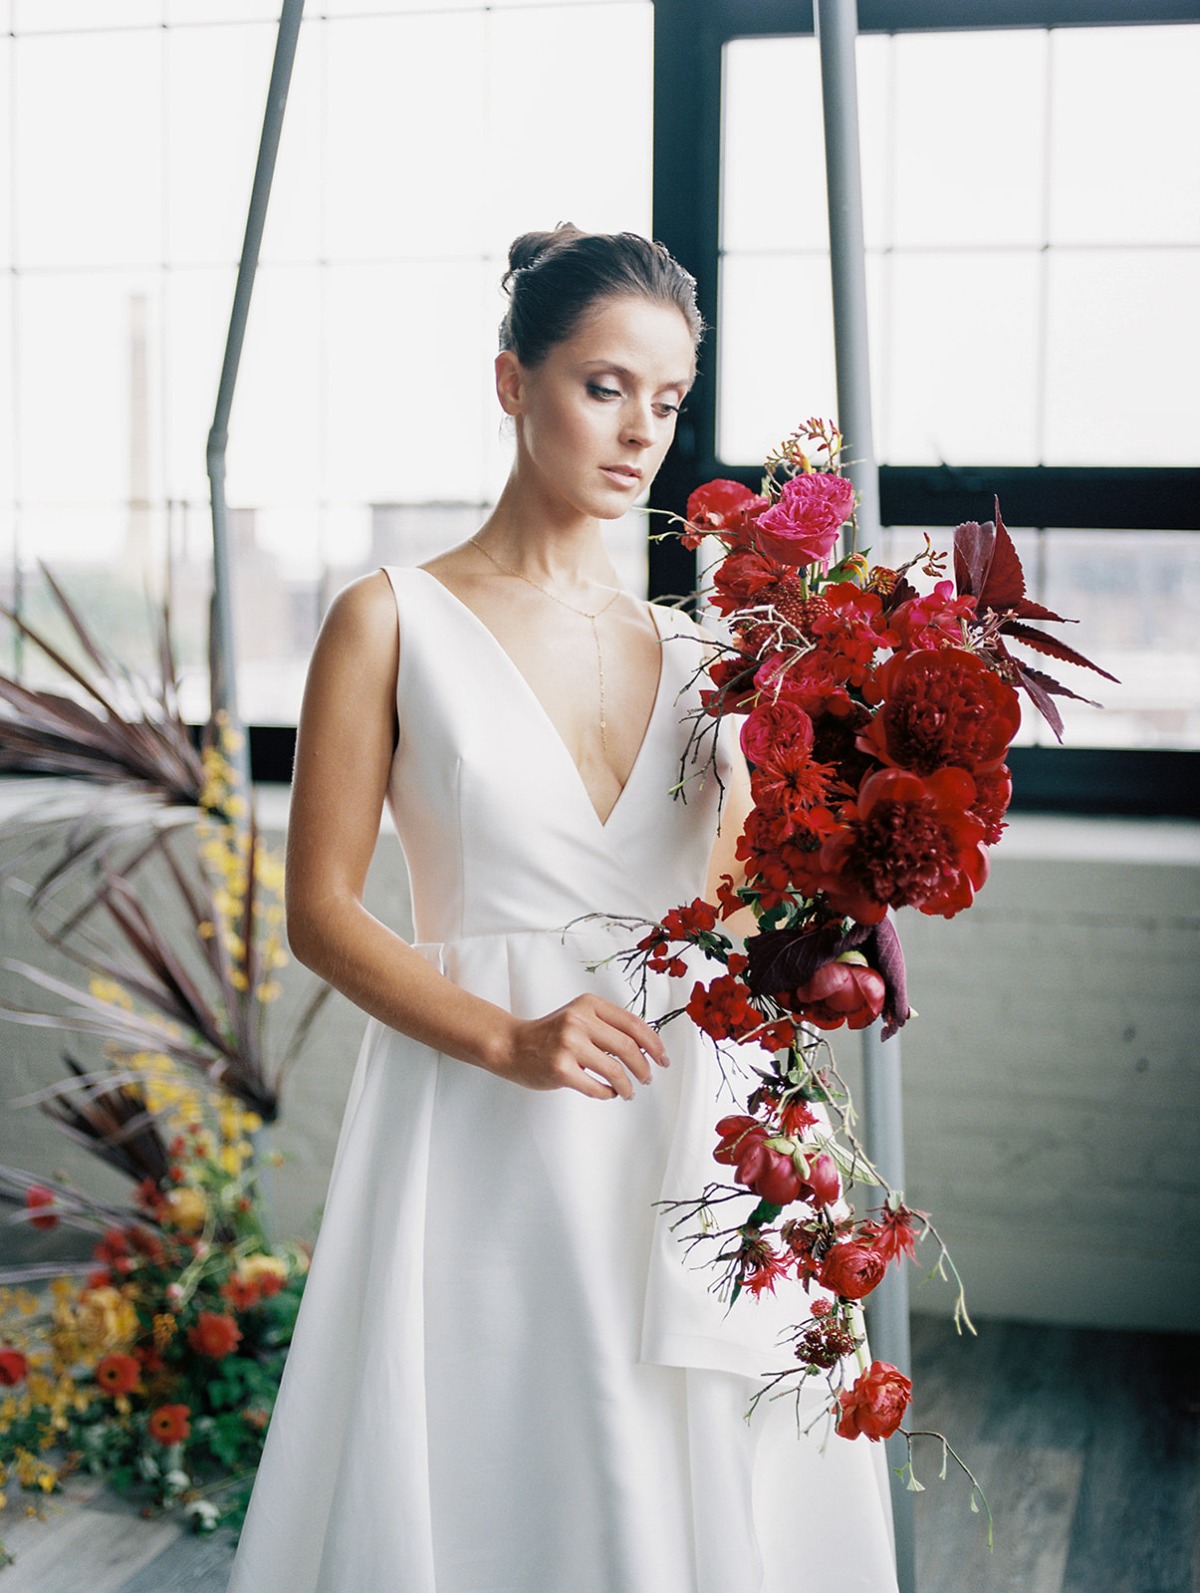 How To Give Your Modern Wedding A Vogue Vibe